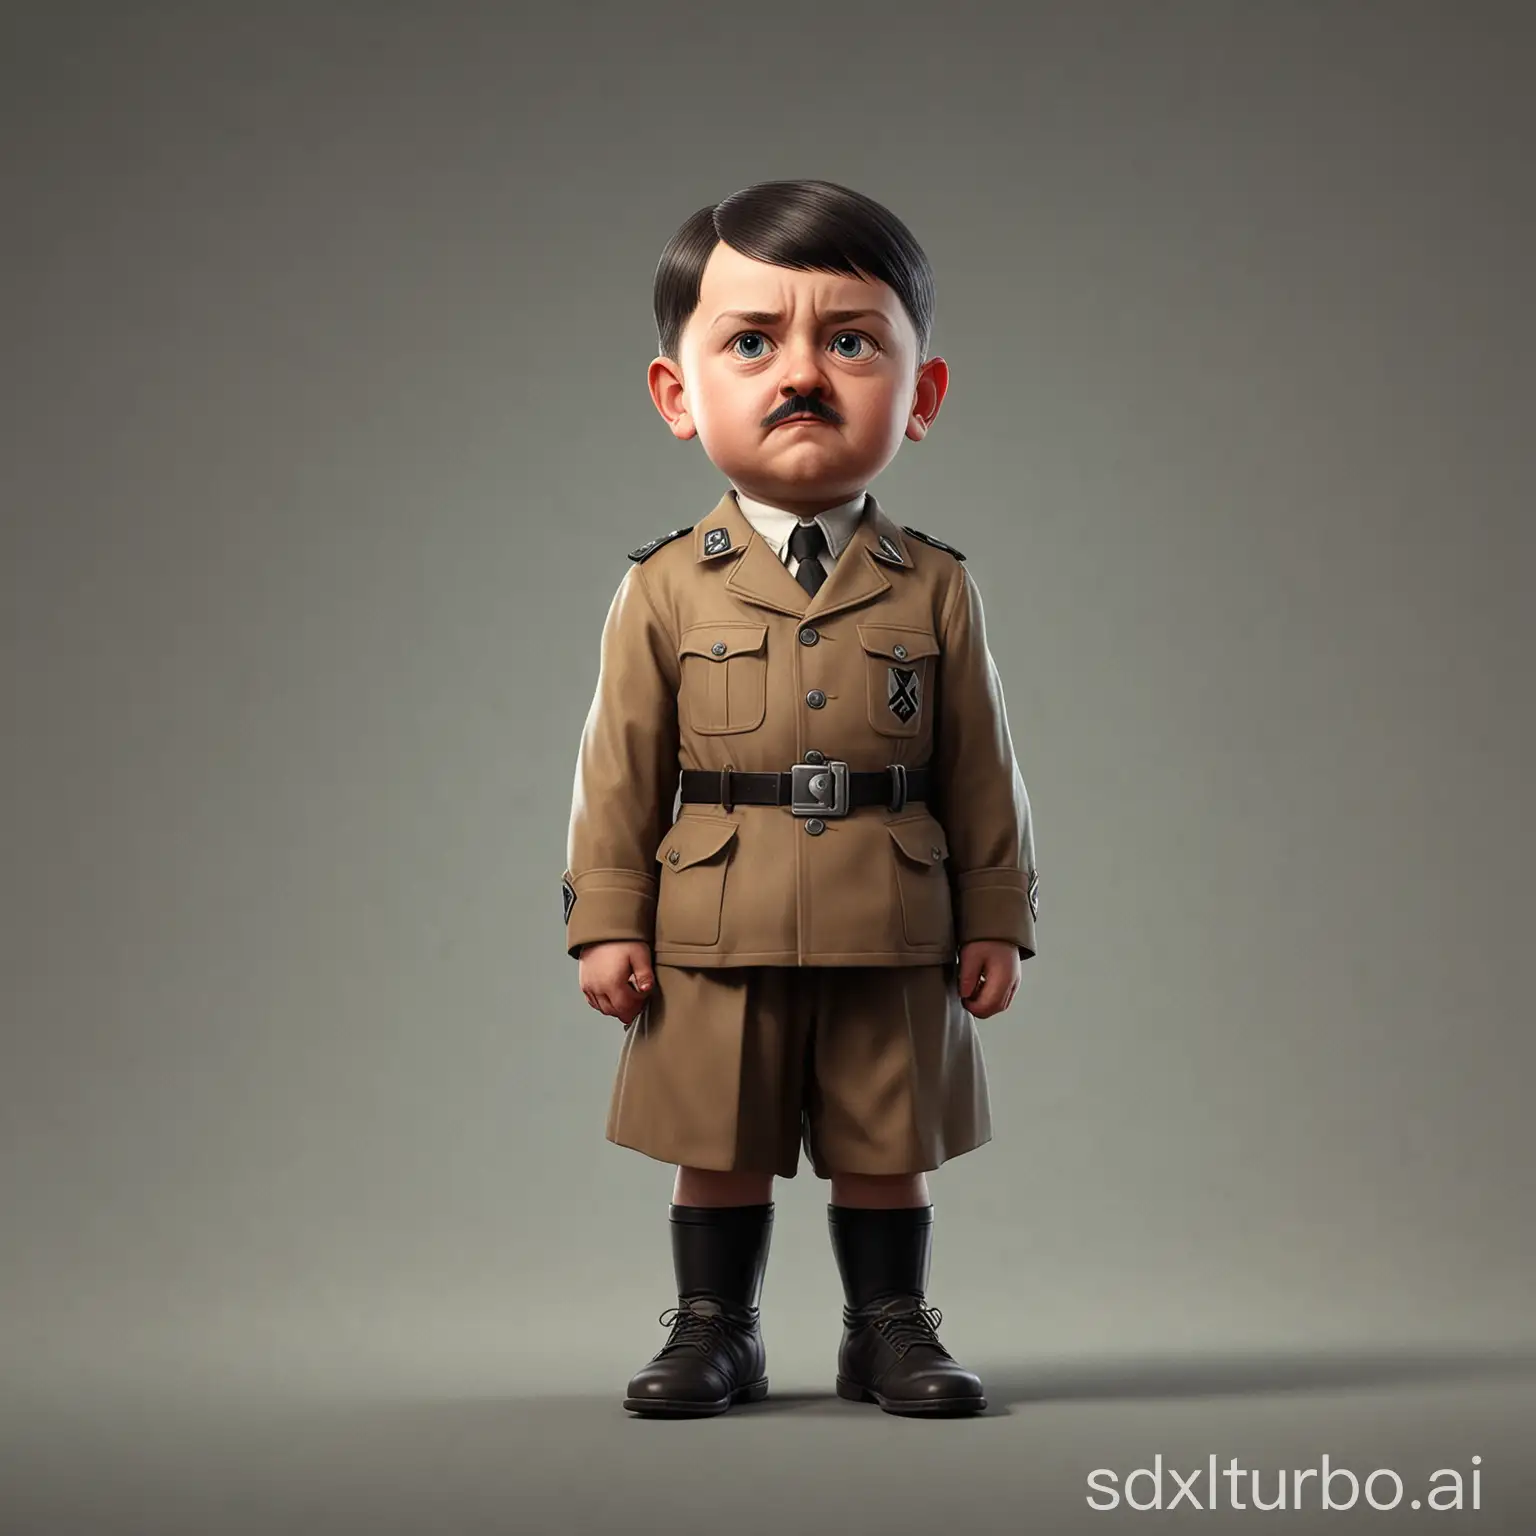 Little child hitler, game character, stands at full height